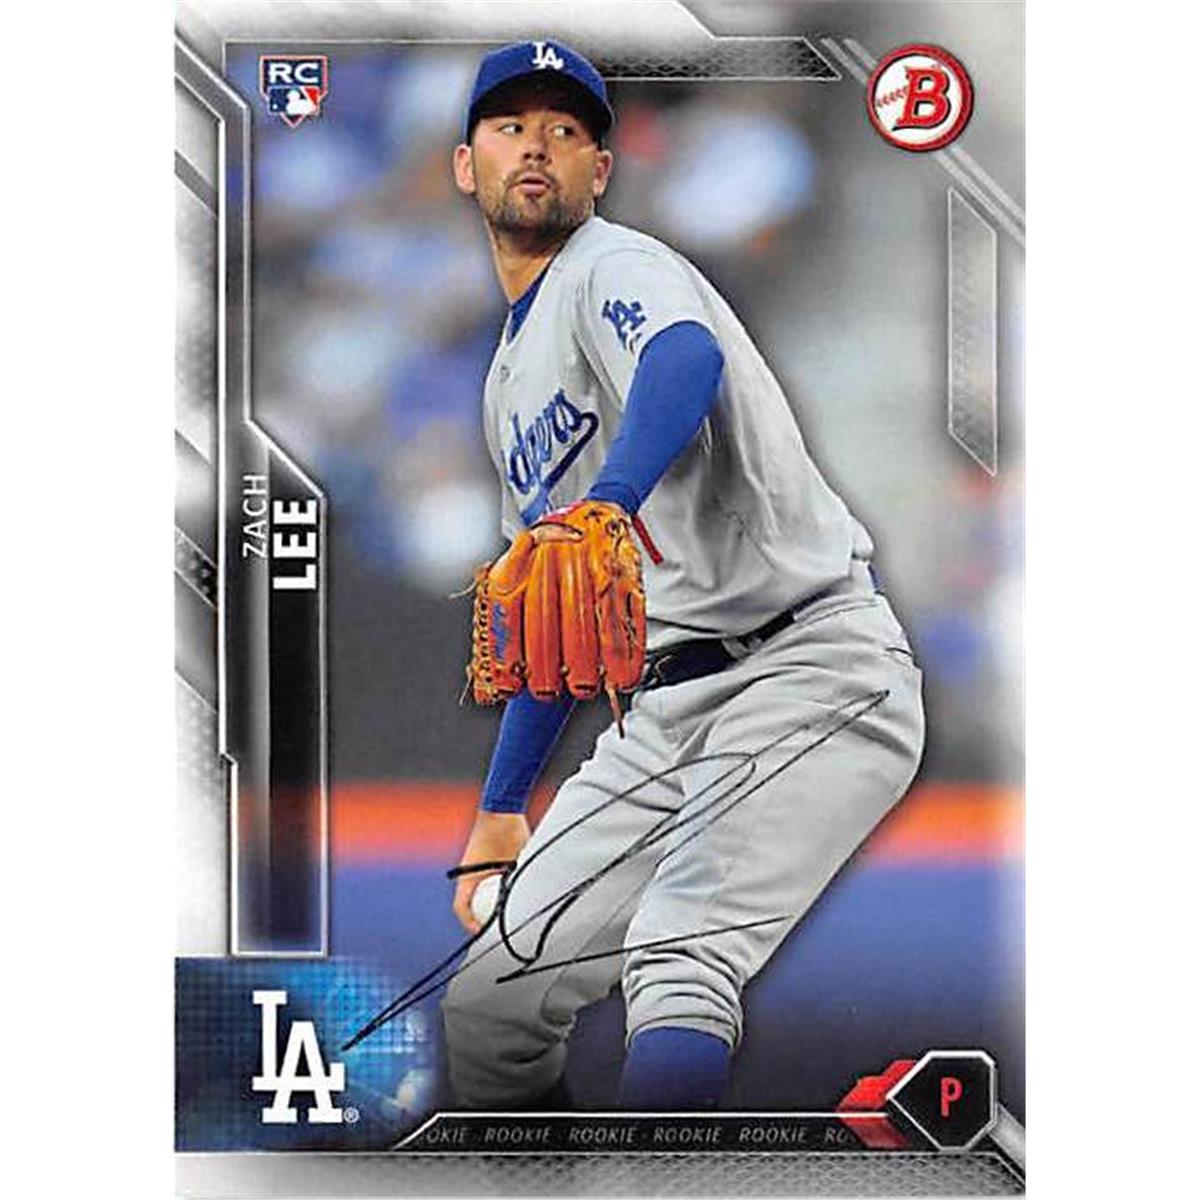 Picture of Autograph Warehouse 365326 Zach Lee Autographed Baseball Card - Los Angeles Dodgers 2016 Topps Bowman No.138